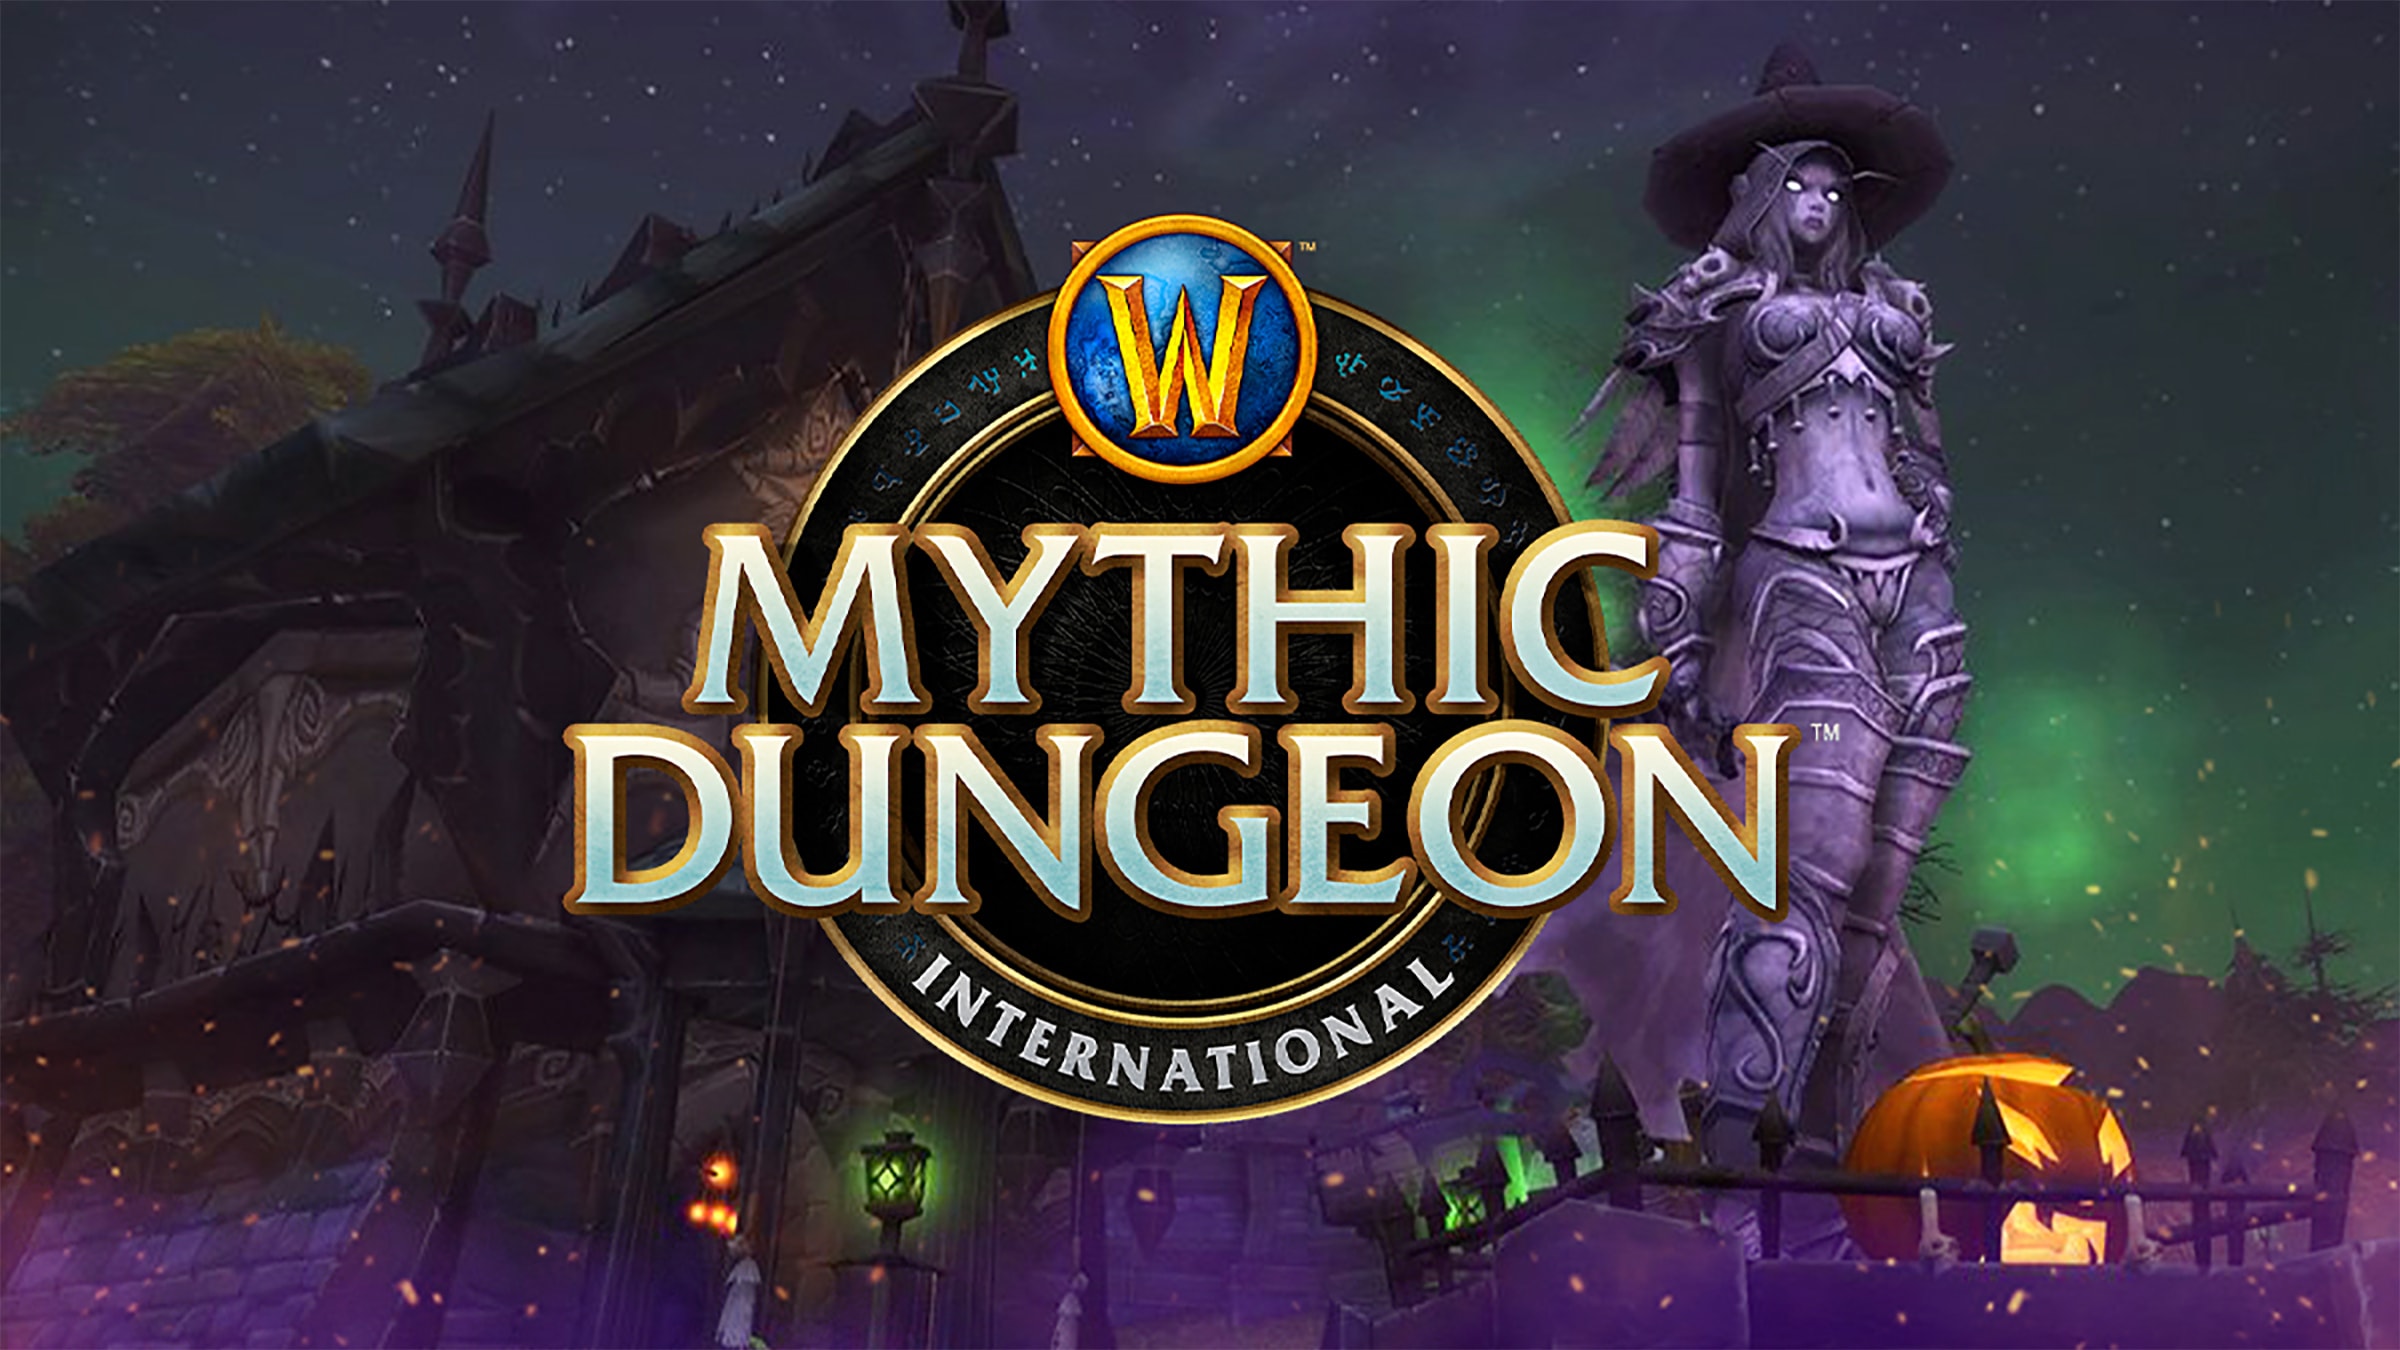 Ecco le Global Finals del Mythic Dungeon International 2021!